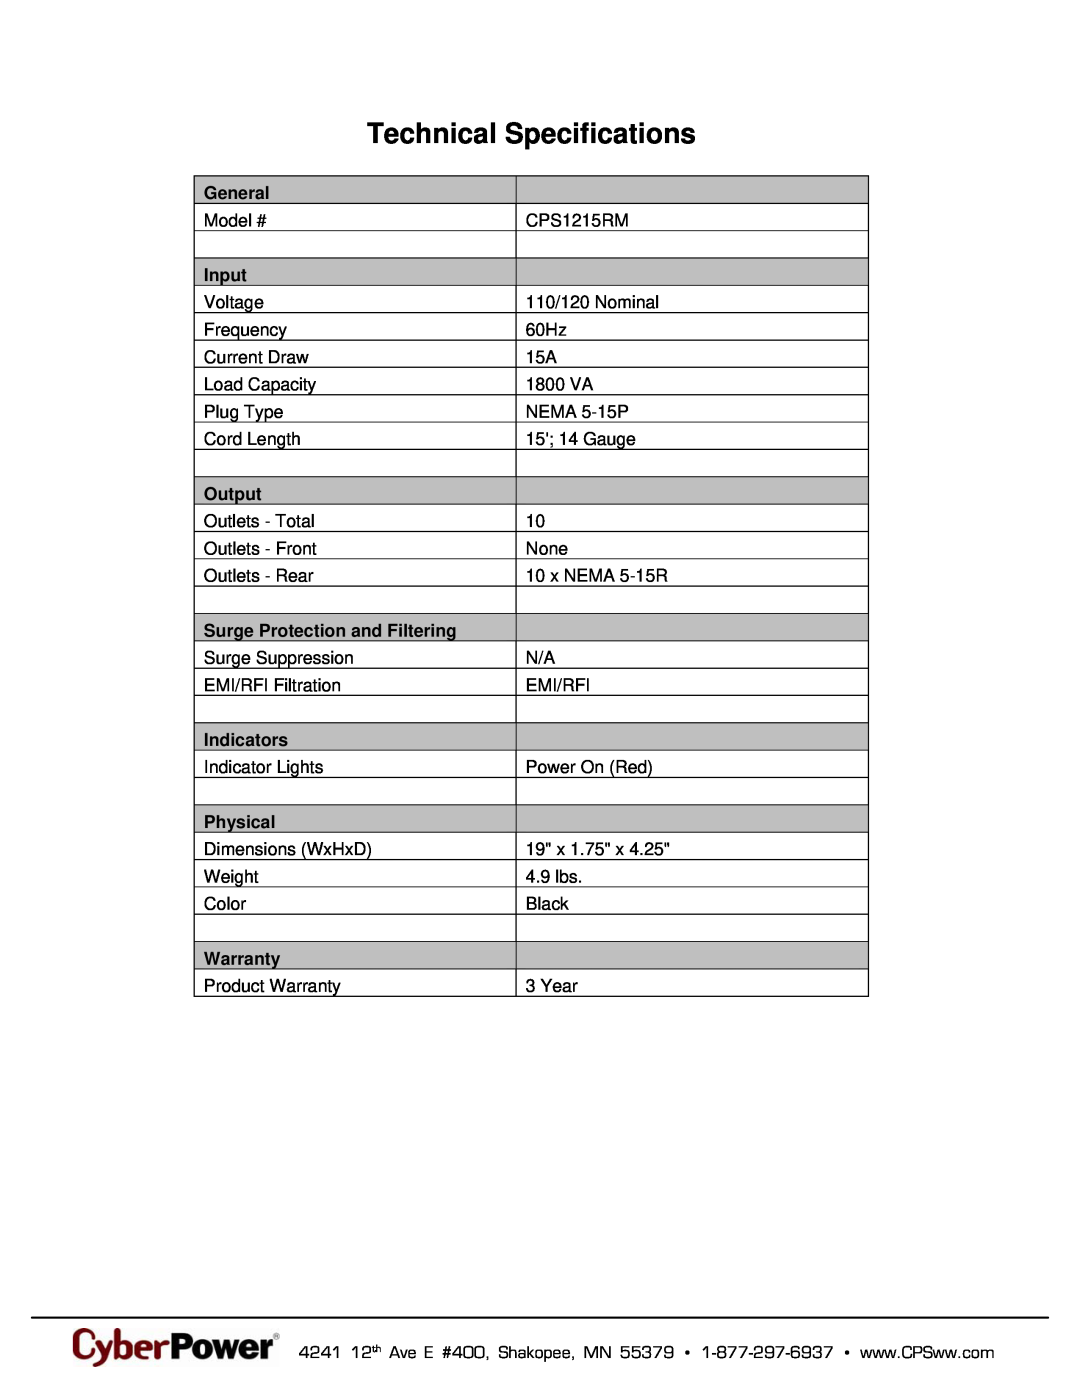 CyberPower Systems CPS1215RM Technical Specifications, General, Input, Output, Surge Protection and Filtering, Indicators 